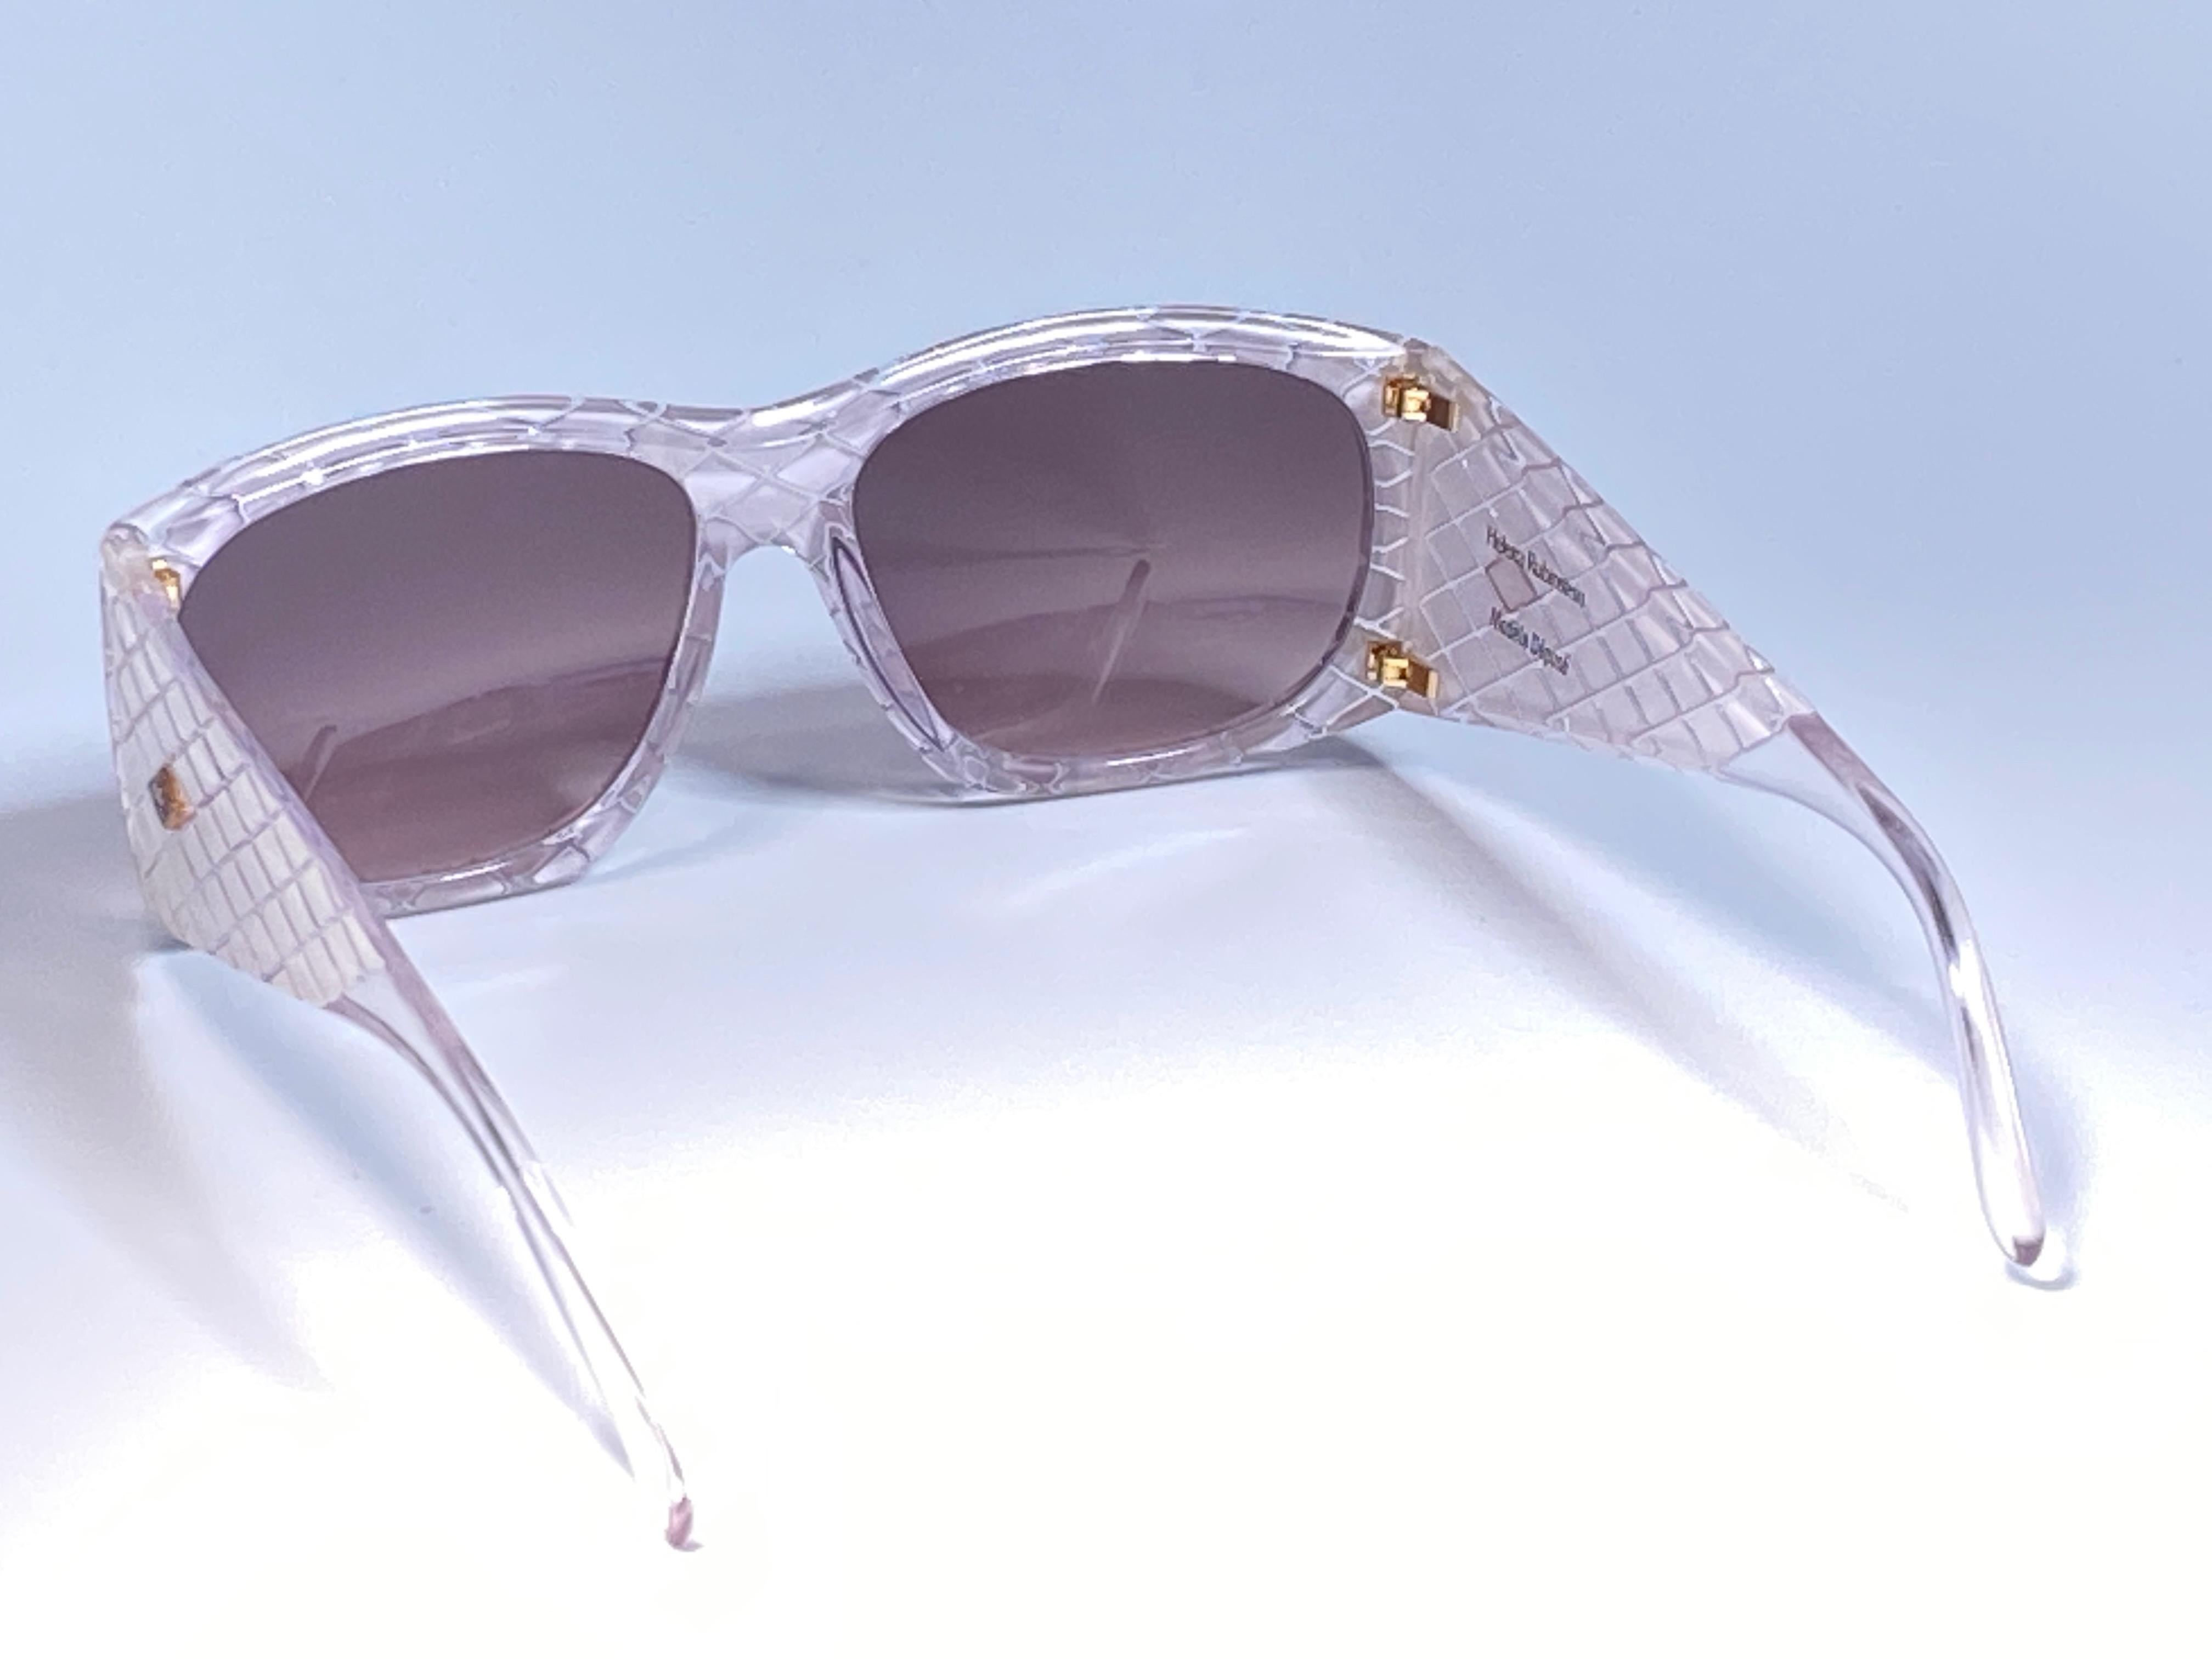 Vintage Helena Rubinstein White & Translucent Quilted Sunglasses France In Excellent Condition For Sale In Baleares, Baleares